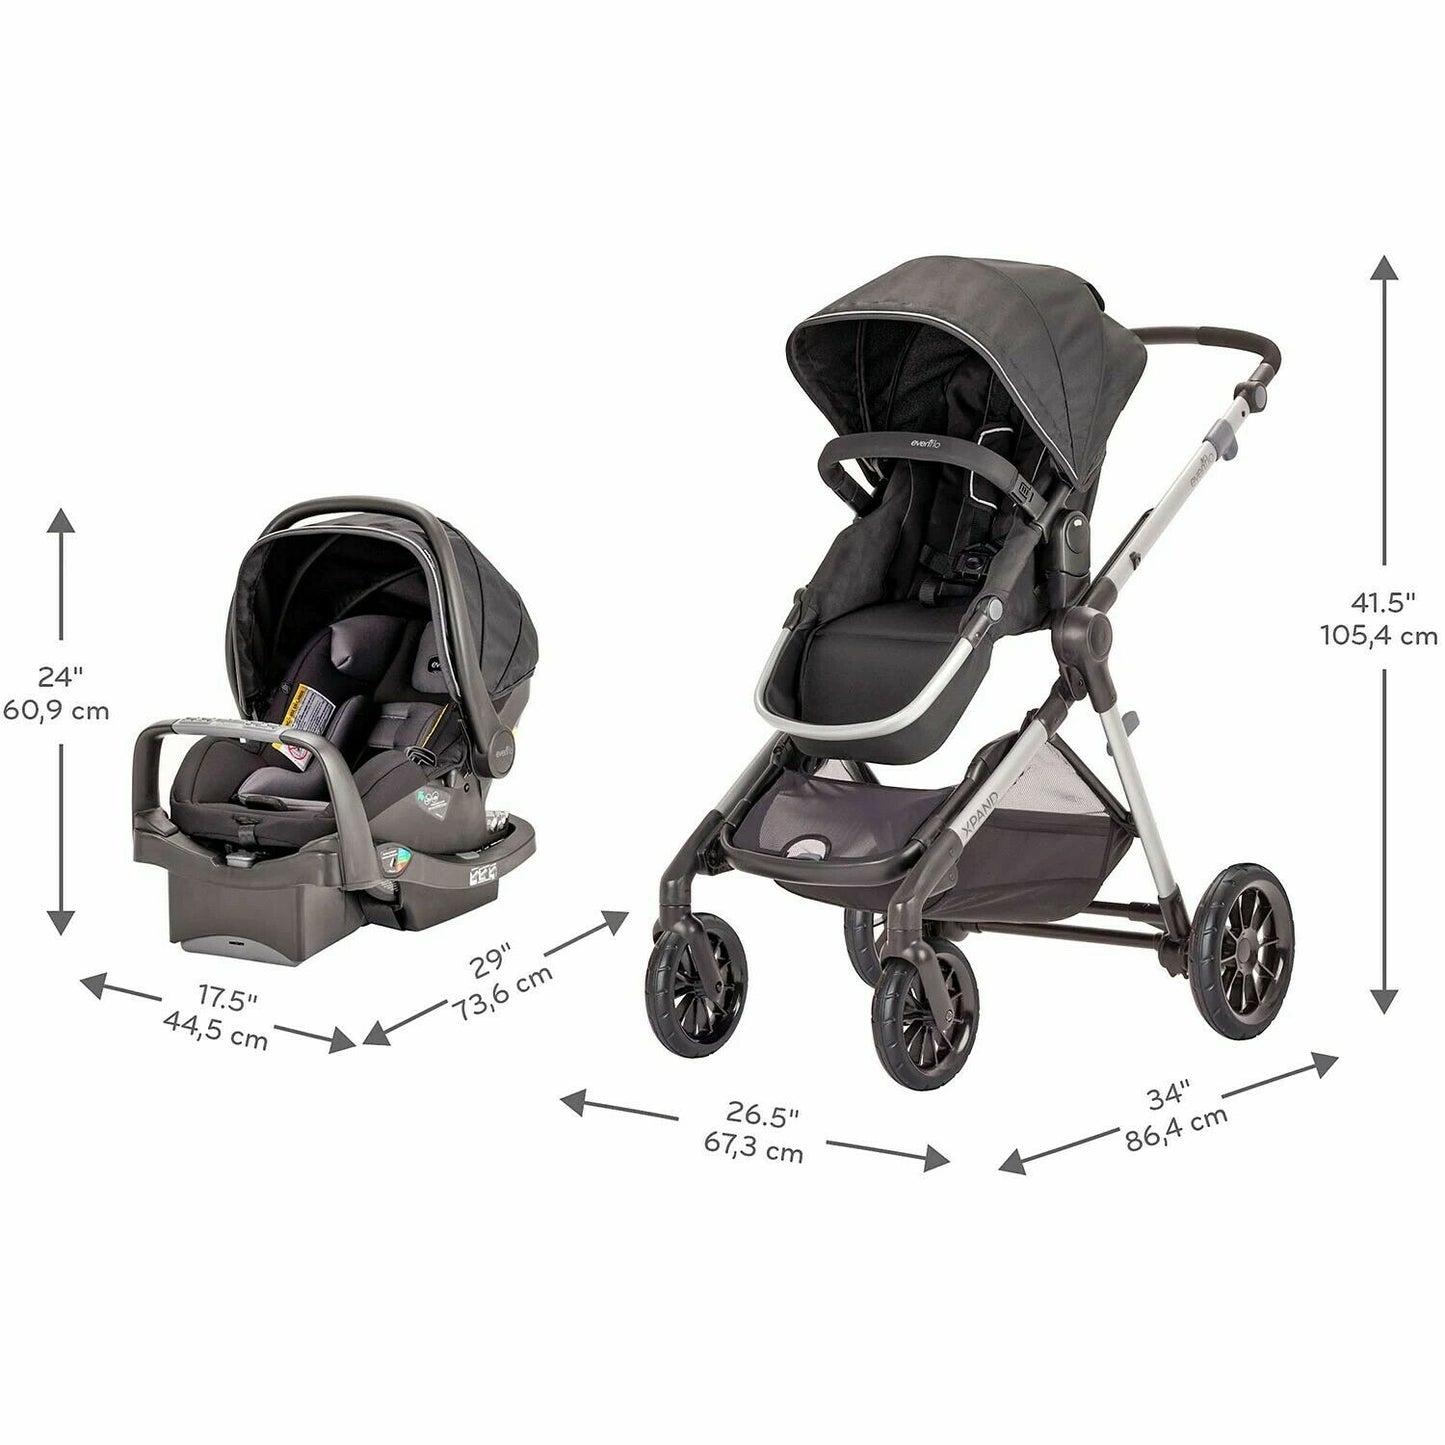 Single and Double Stroller with SafeMax Infant Car Seat Travel System Combo